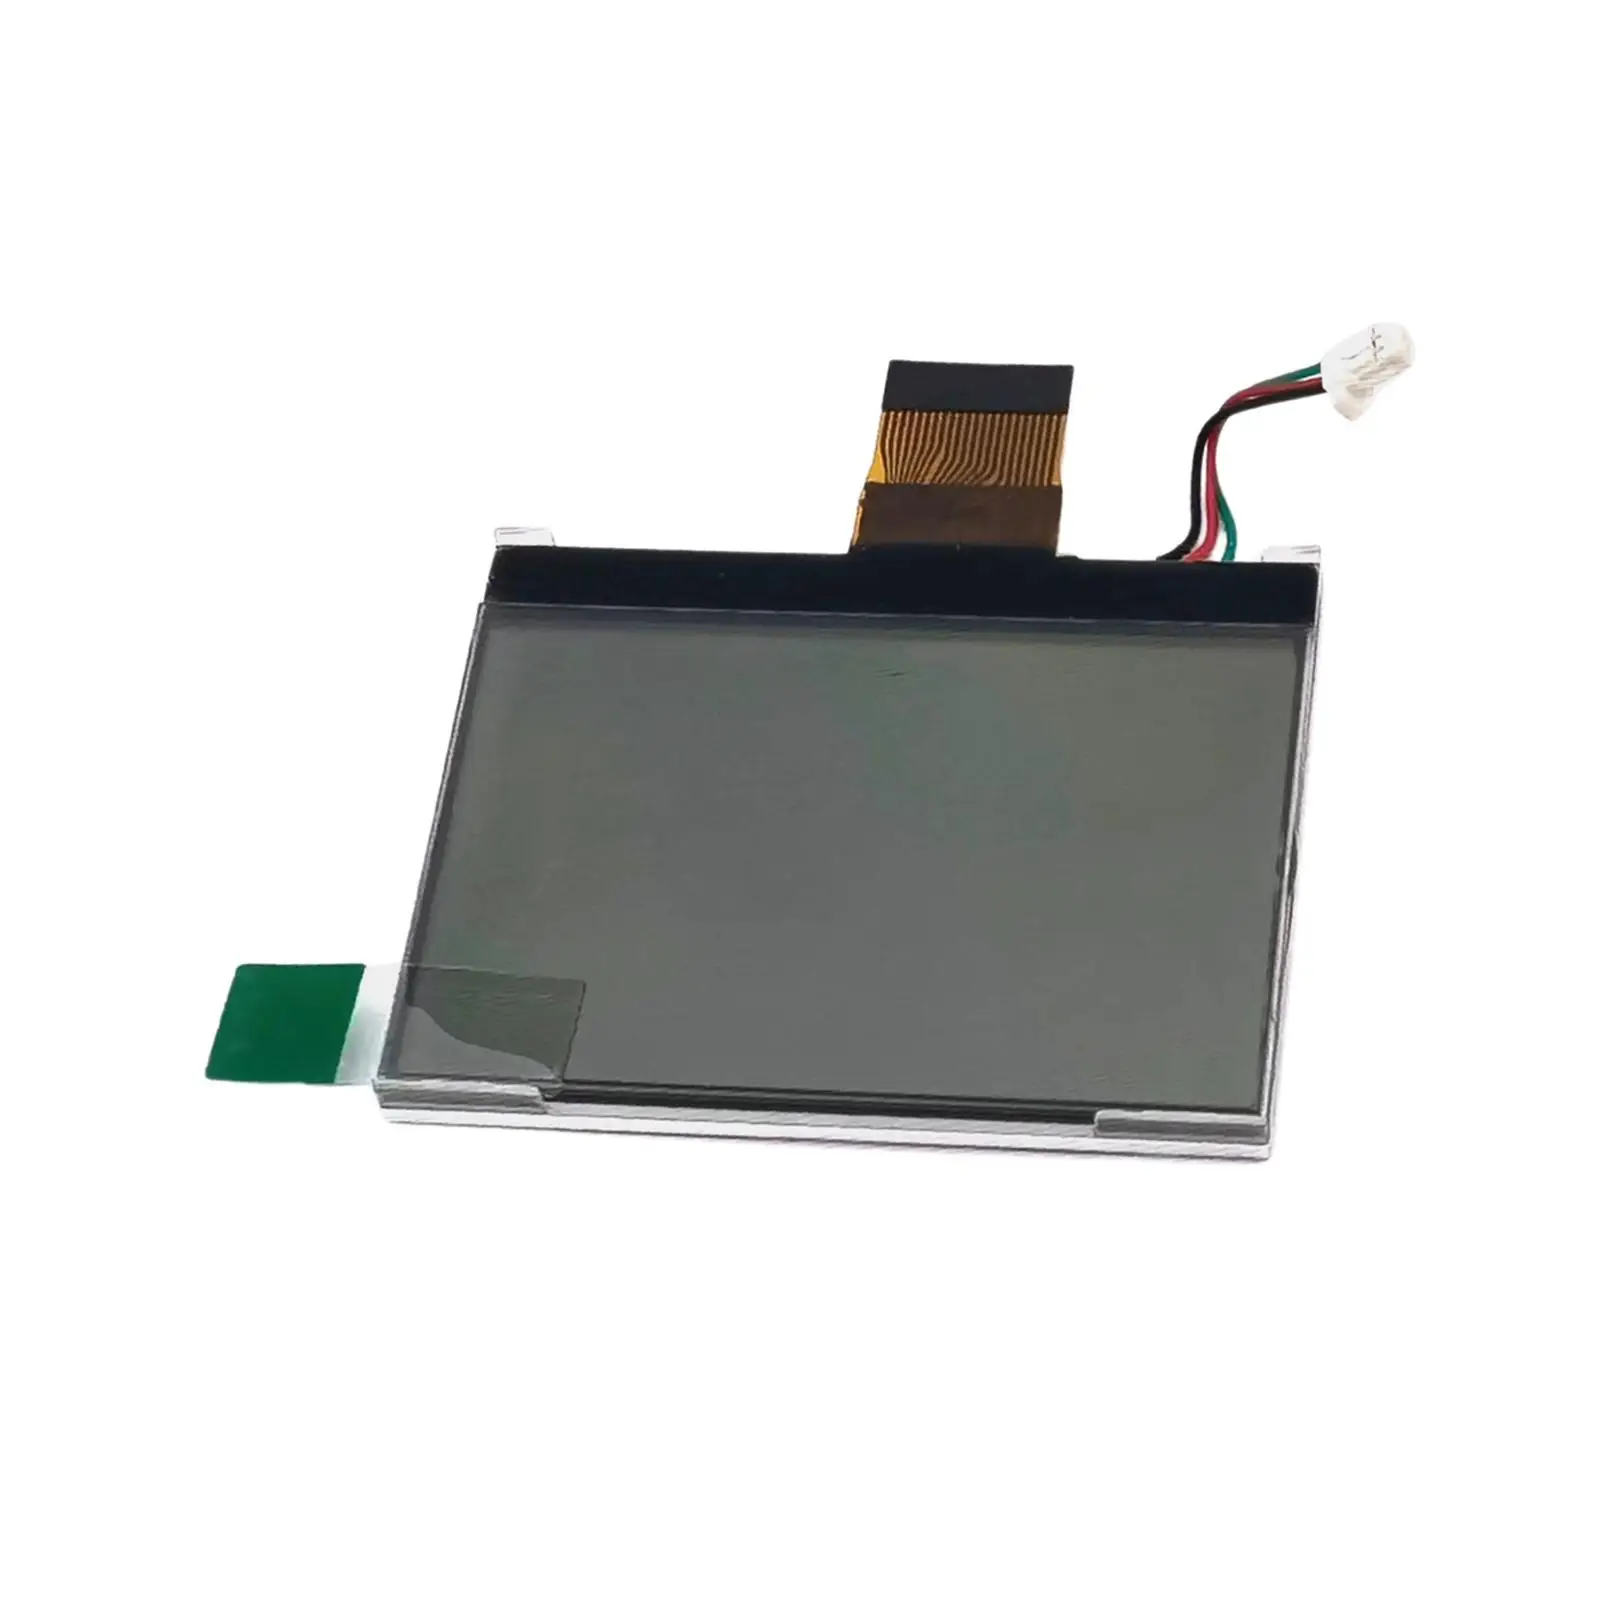 LCD Screen High Performance Flash Repair Part Replacement Parts for V860 TT685 V860II AD360II Accessories